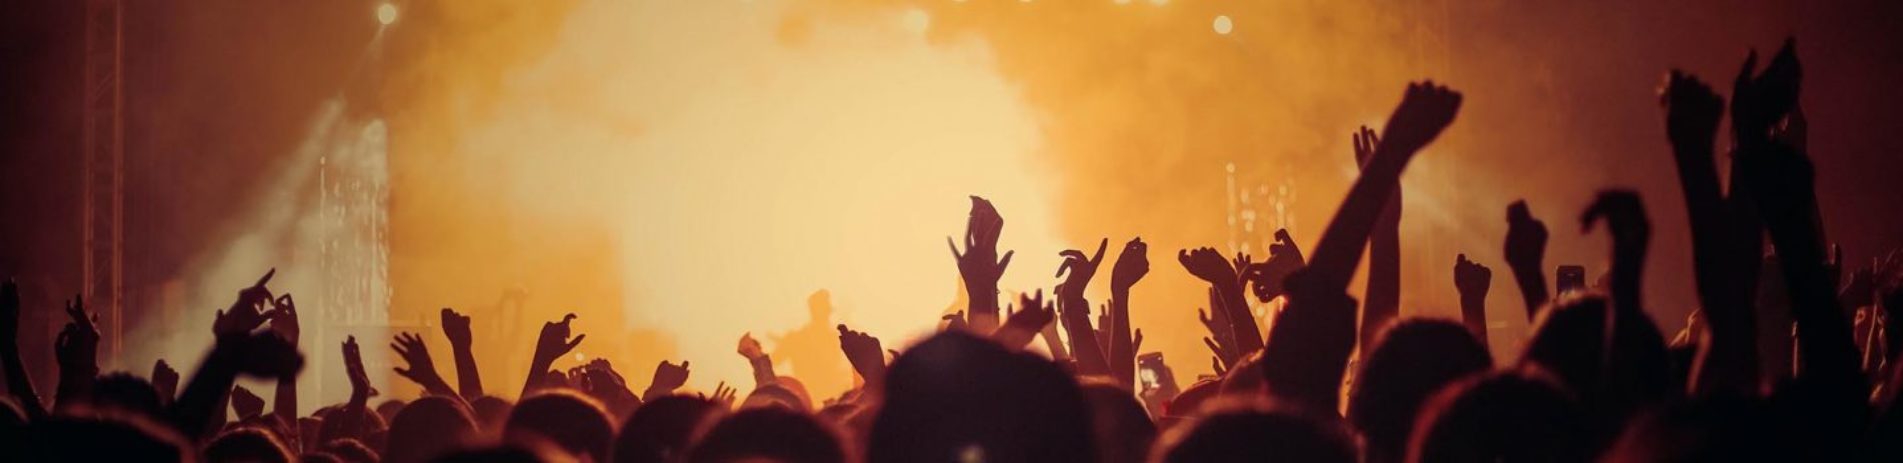 music-festival-atmosphere-orange-lights-and-steam-and-large-crowd-with-hands-up